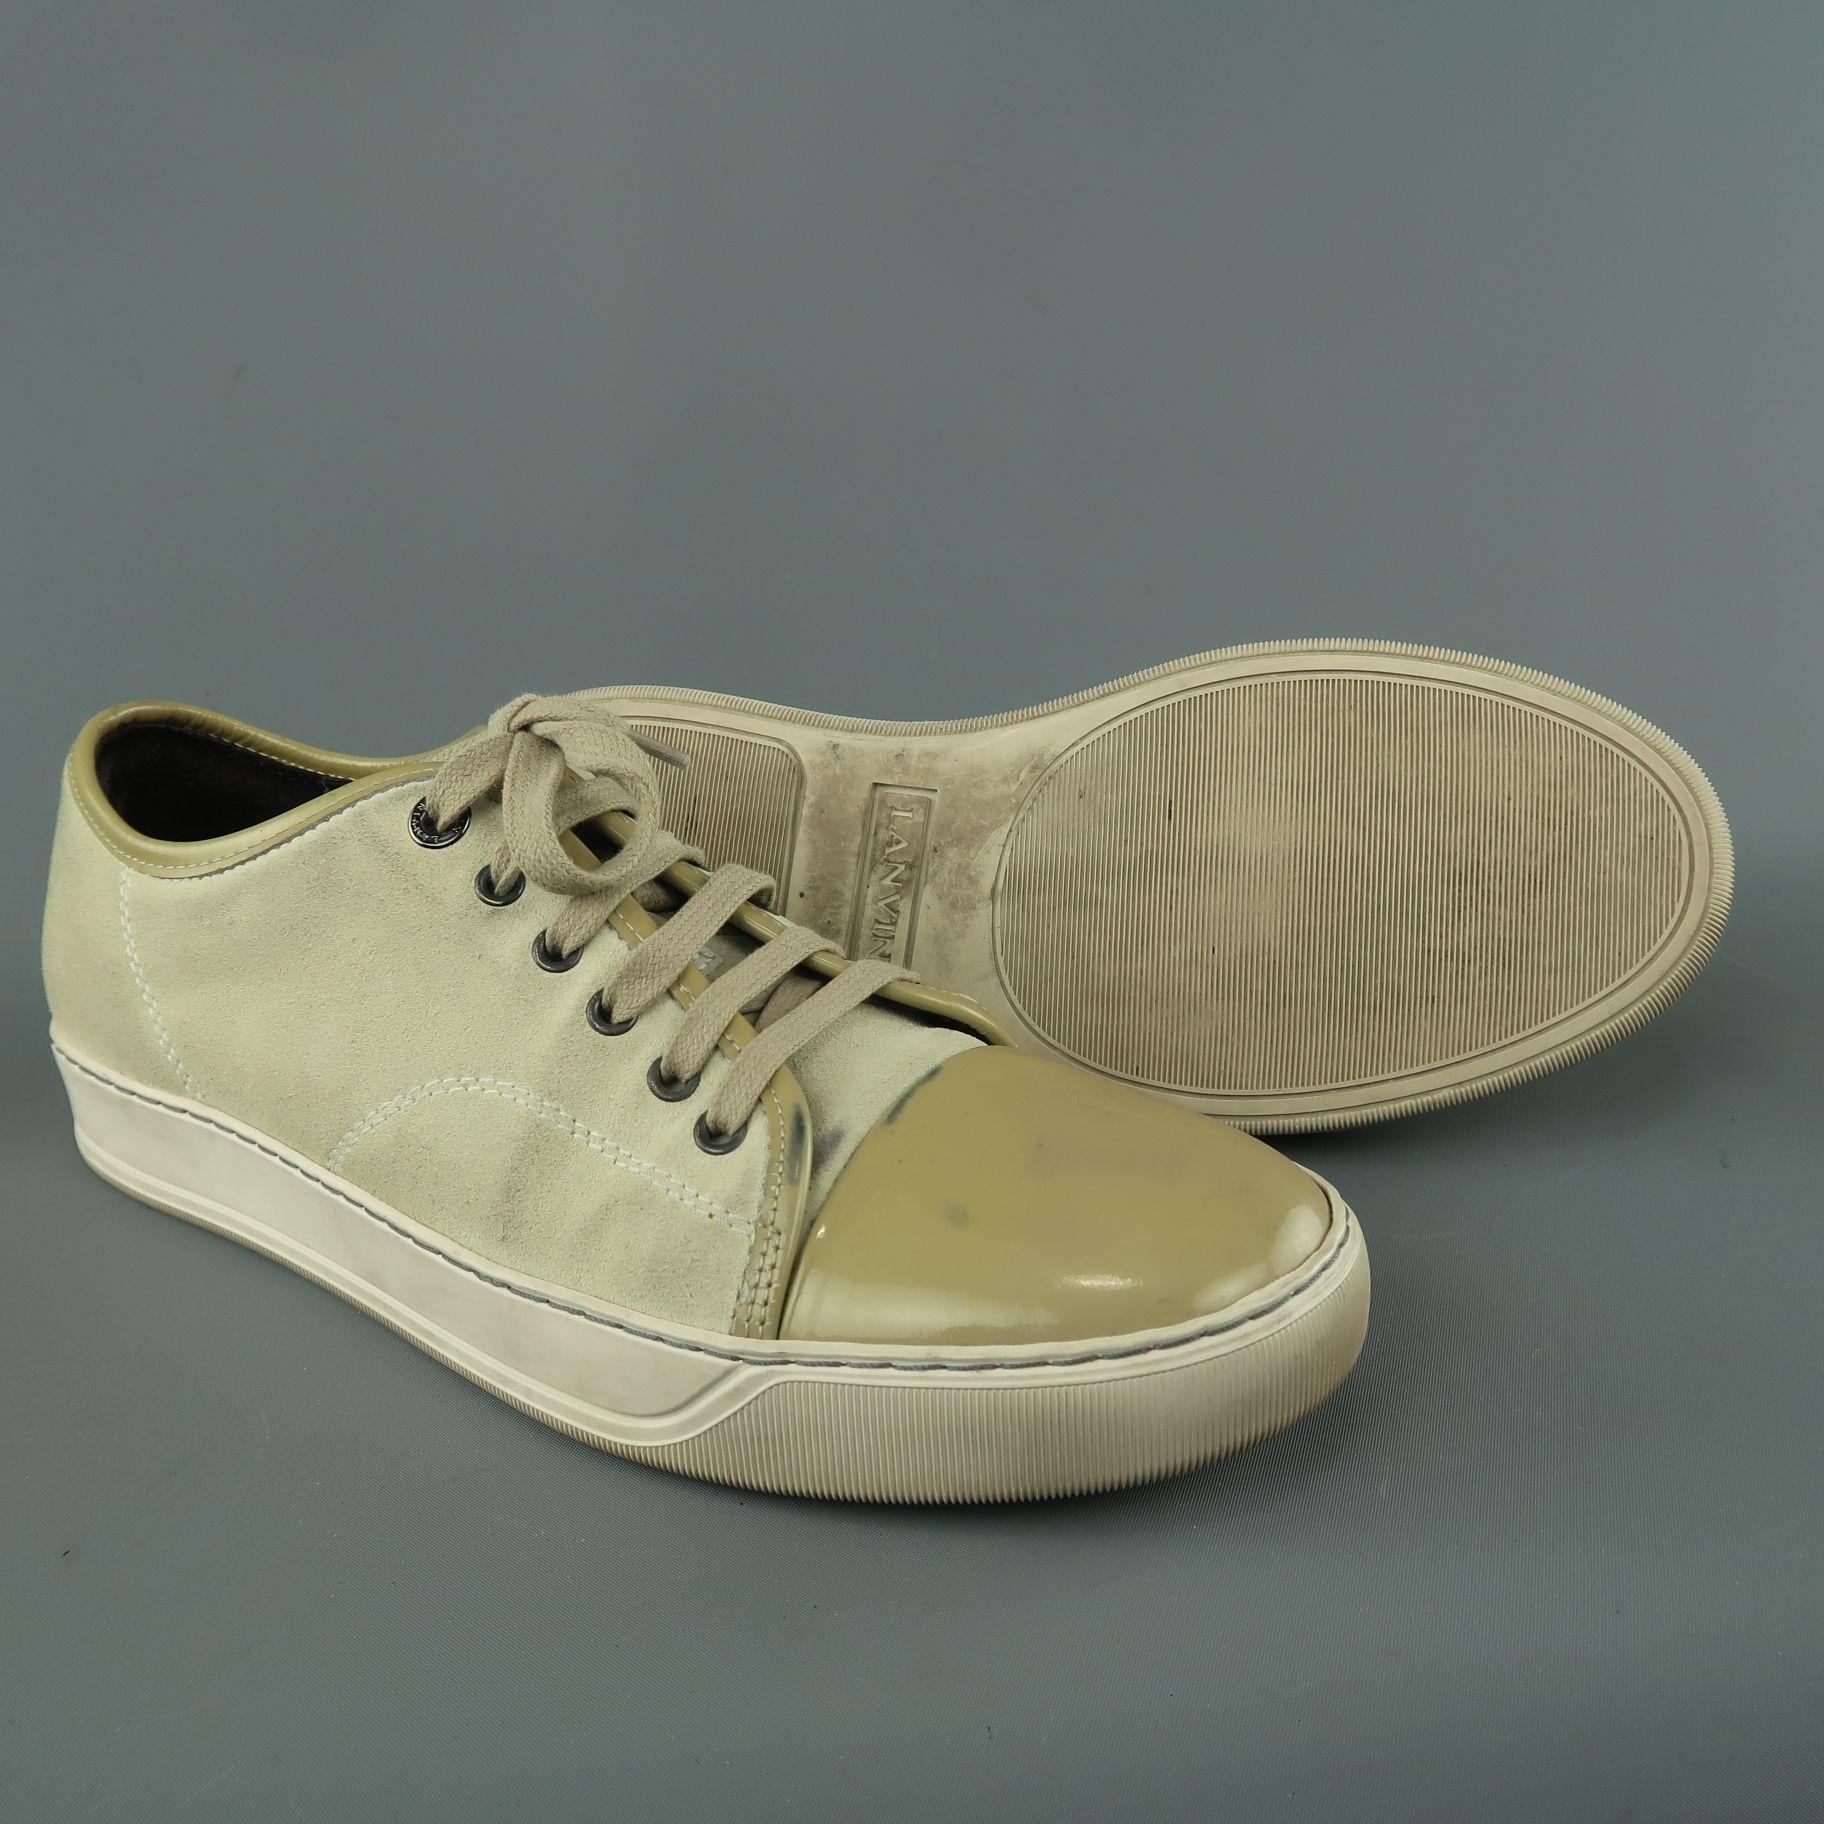 Men's LANVIN Size 9 Beige Suede & Patent Leather Lace Up Sneakers